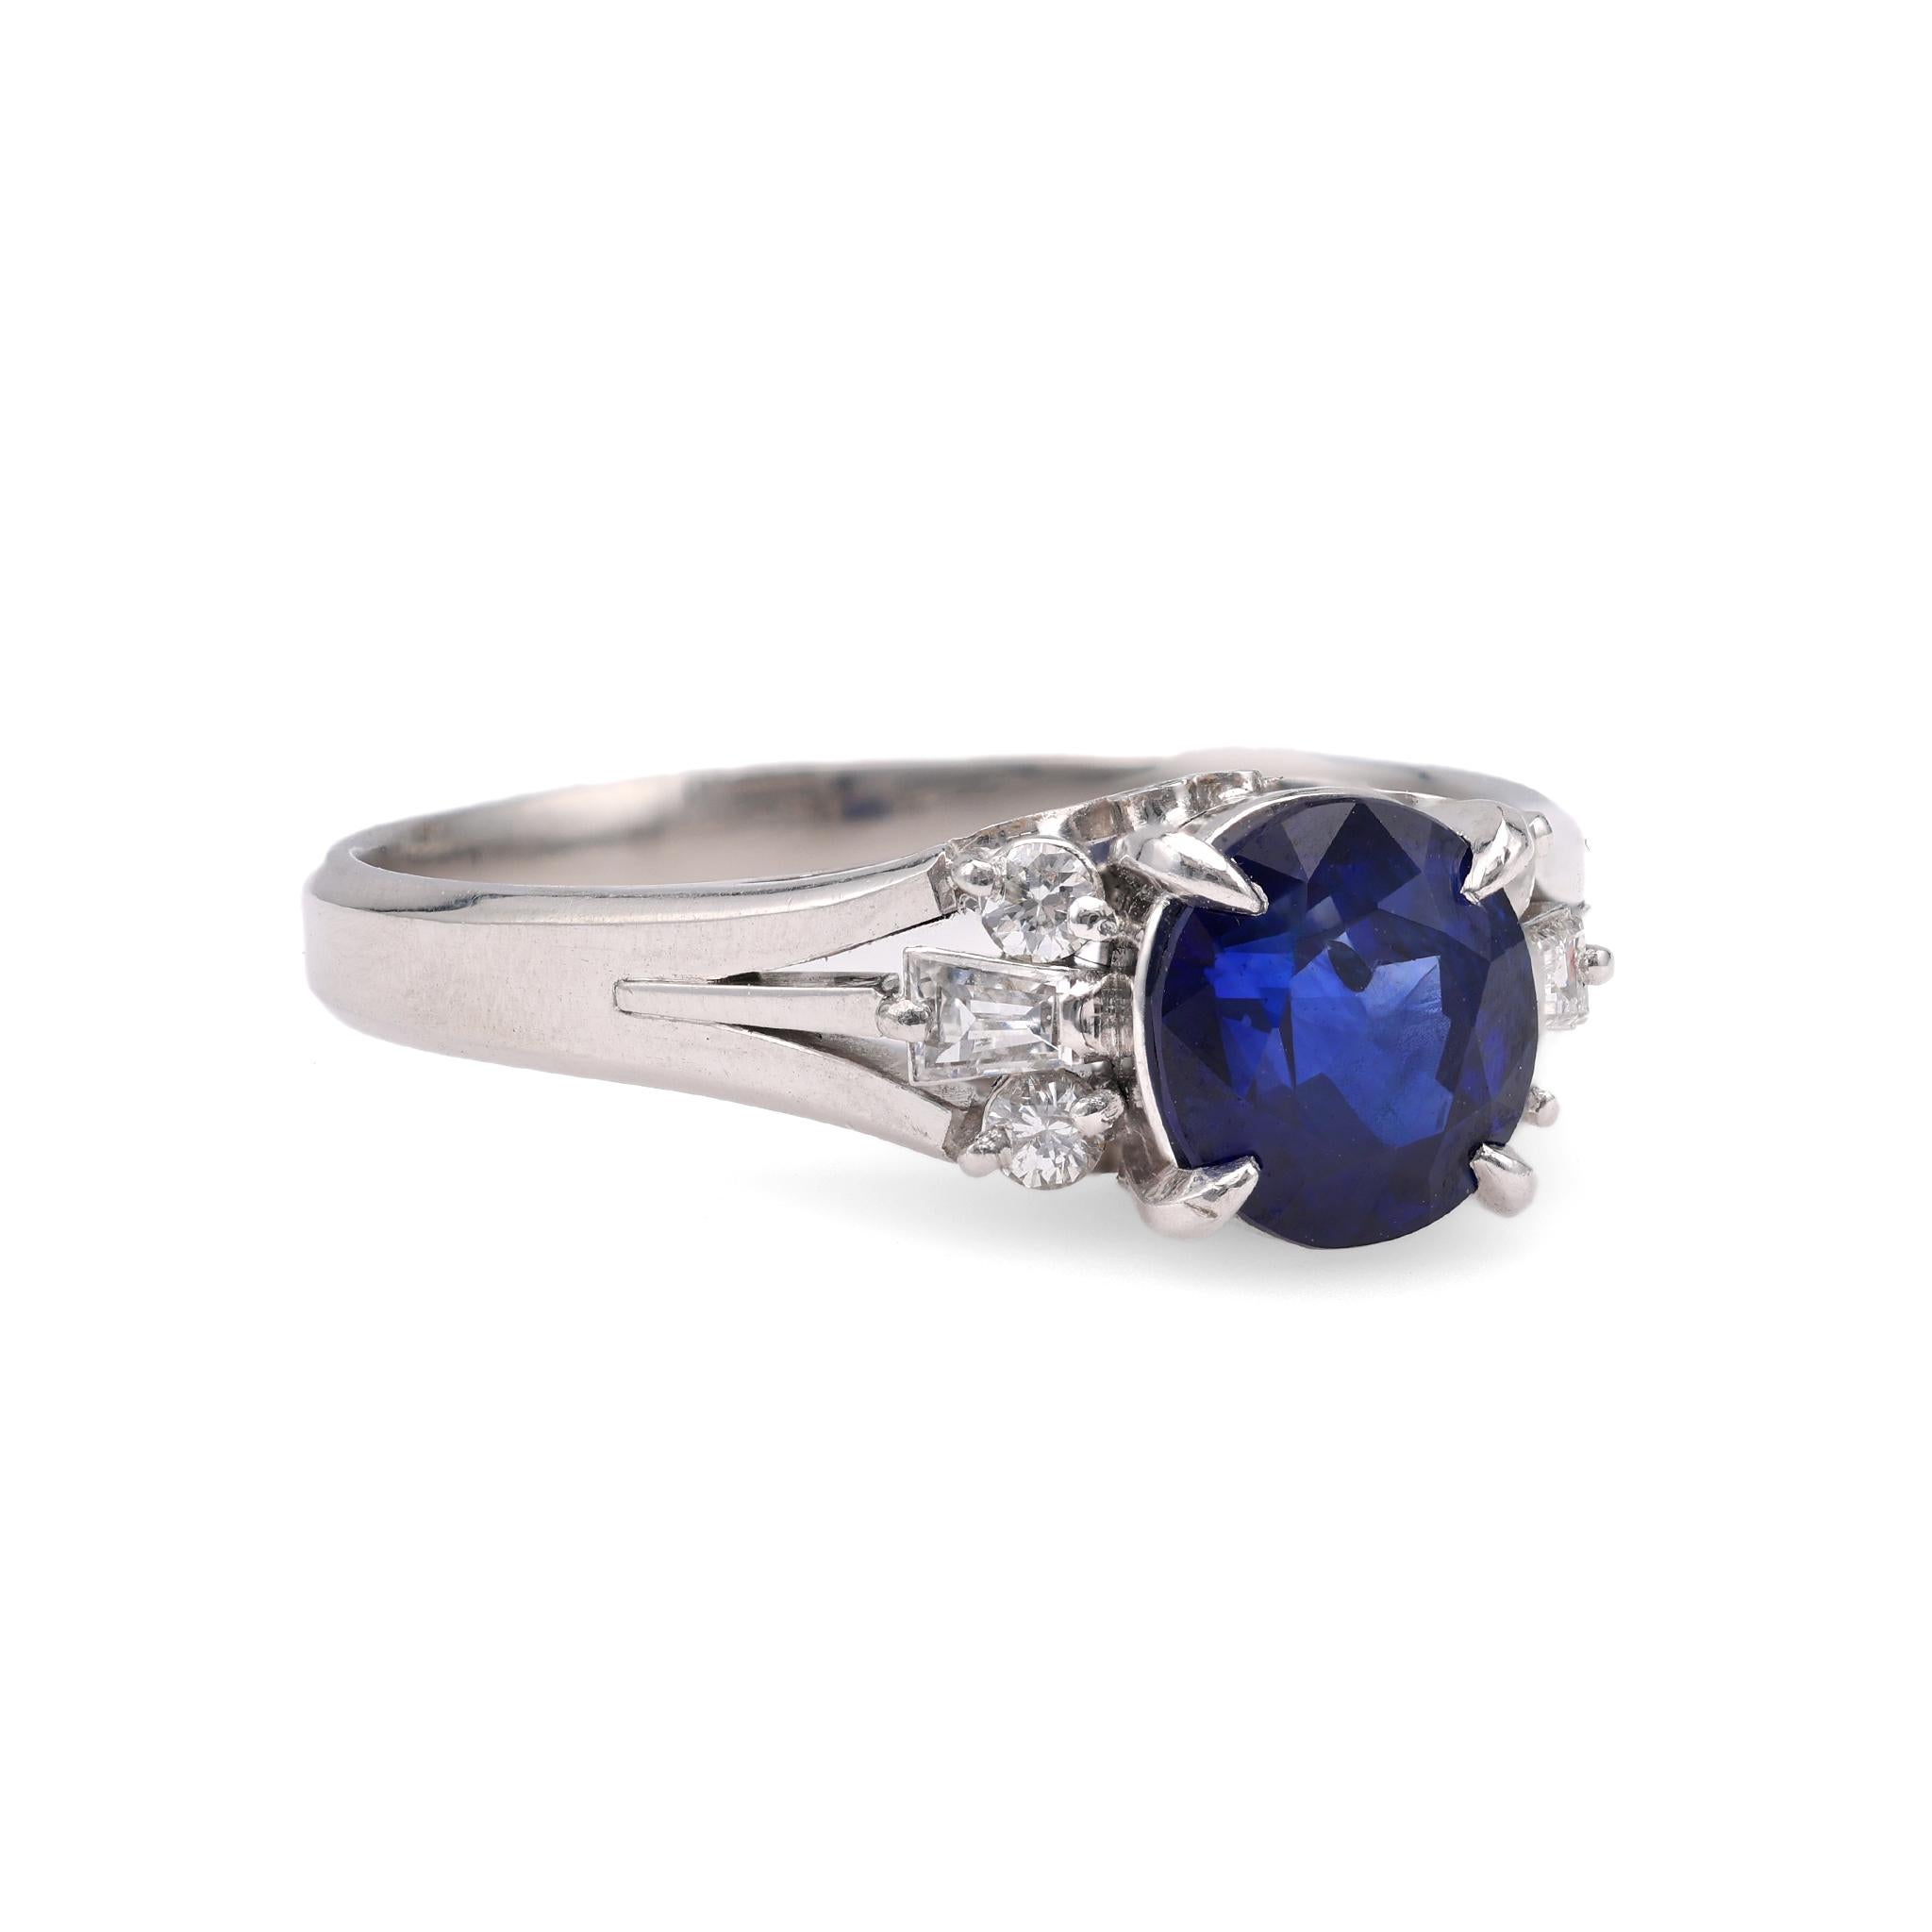 Vintage 1.33 Carat Sapphire Diamond Platinum Ring In Excellent Condition For Sale In Beverly Hills, CA